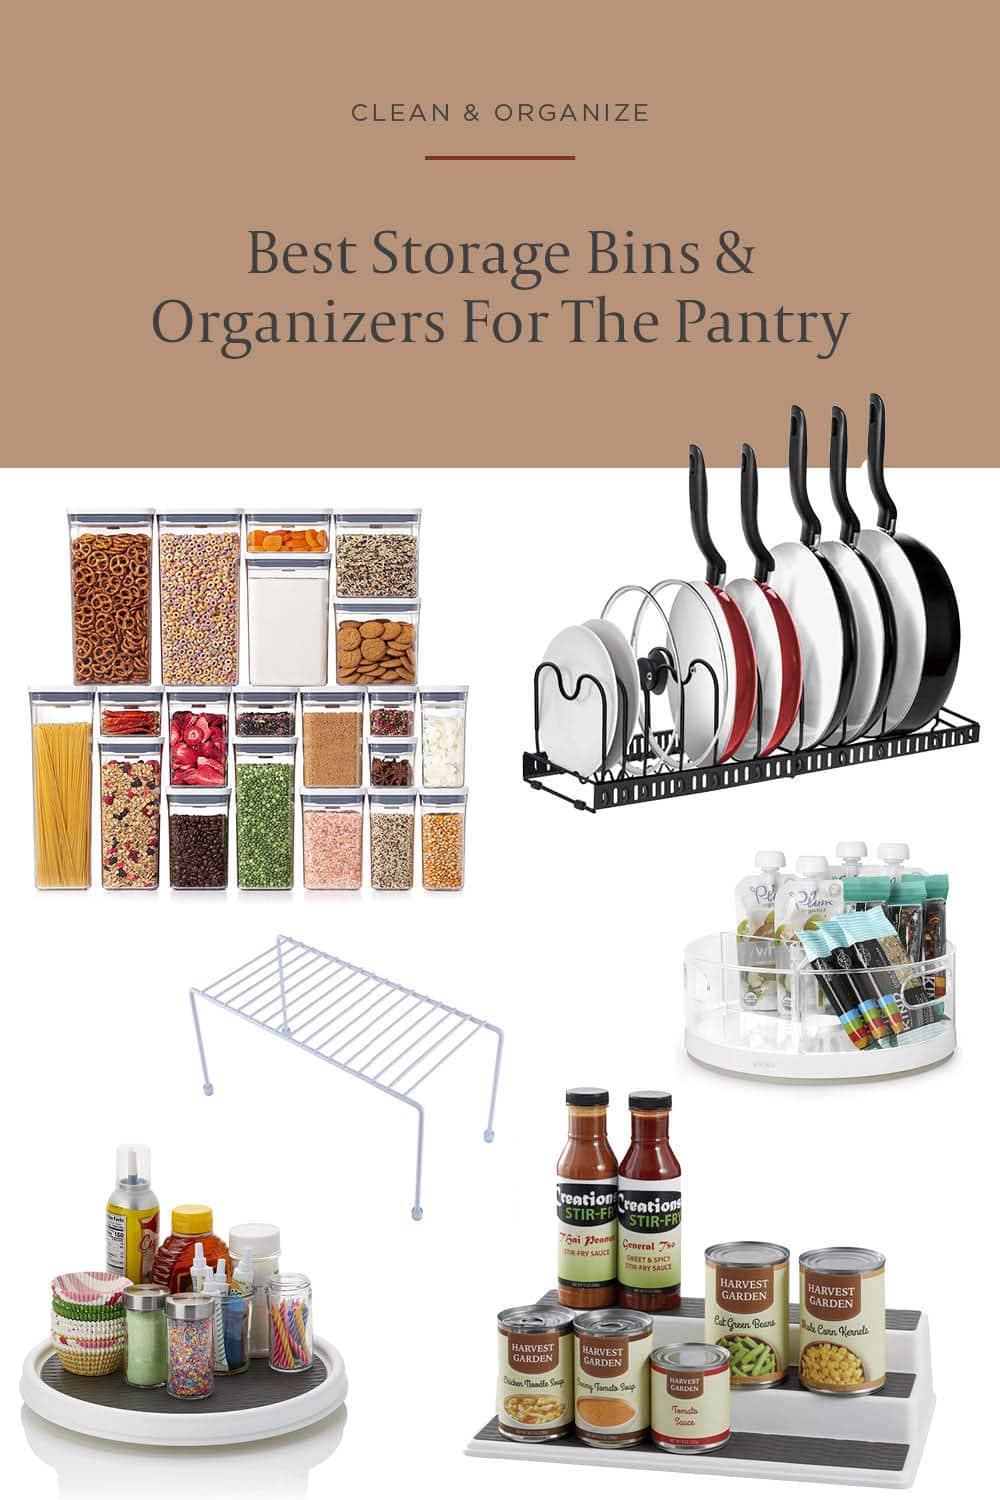 https://houseofhipsters.com/wp-content/uploads/2021/09/best-home-organization-products-pantry-kitchen.jpg